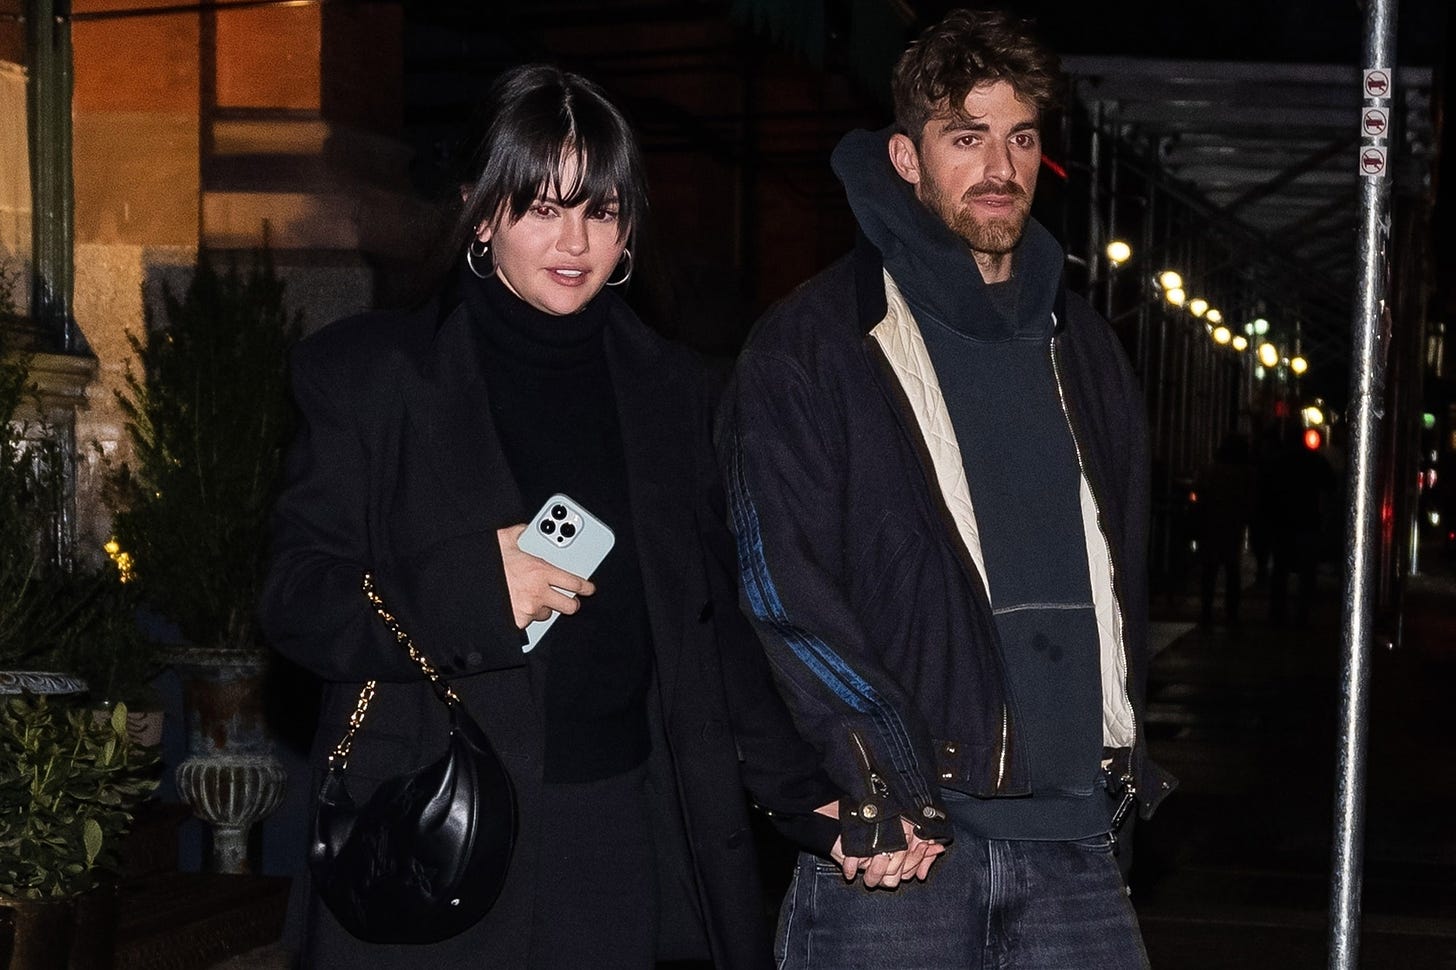 Selena Gomez, Drew Taggart hold hands during NYC date night